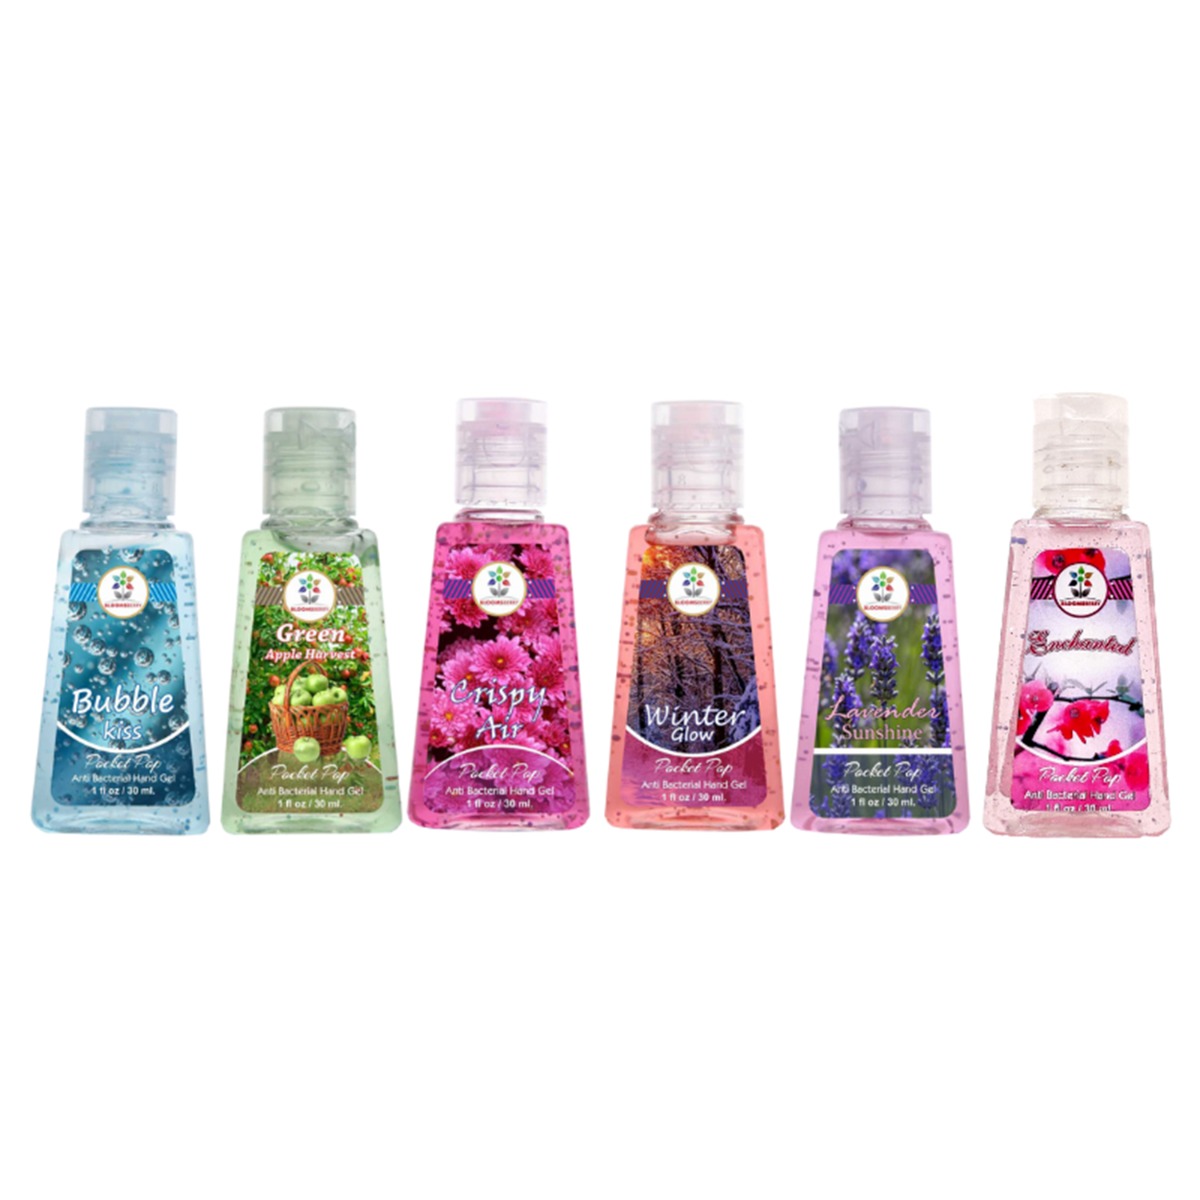 Bloomsberry Bubble Kiss, Green Apple, Crispy Air, Winter Glow, Lavender, Enchanted-hand Sanitizer- Pack Of 6, 180ml